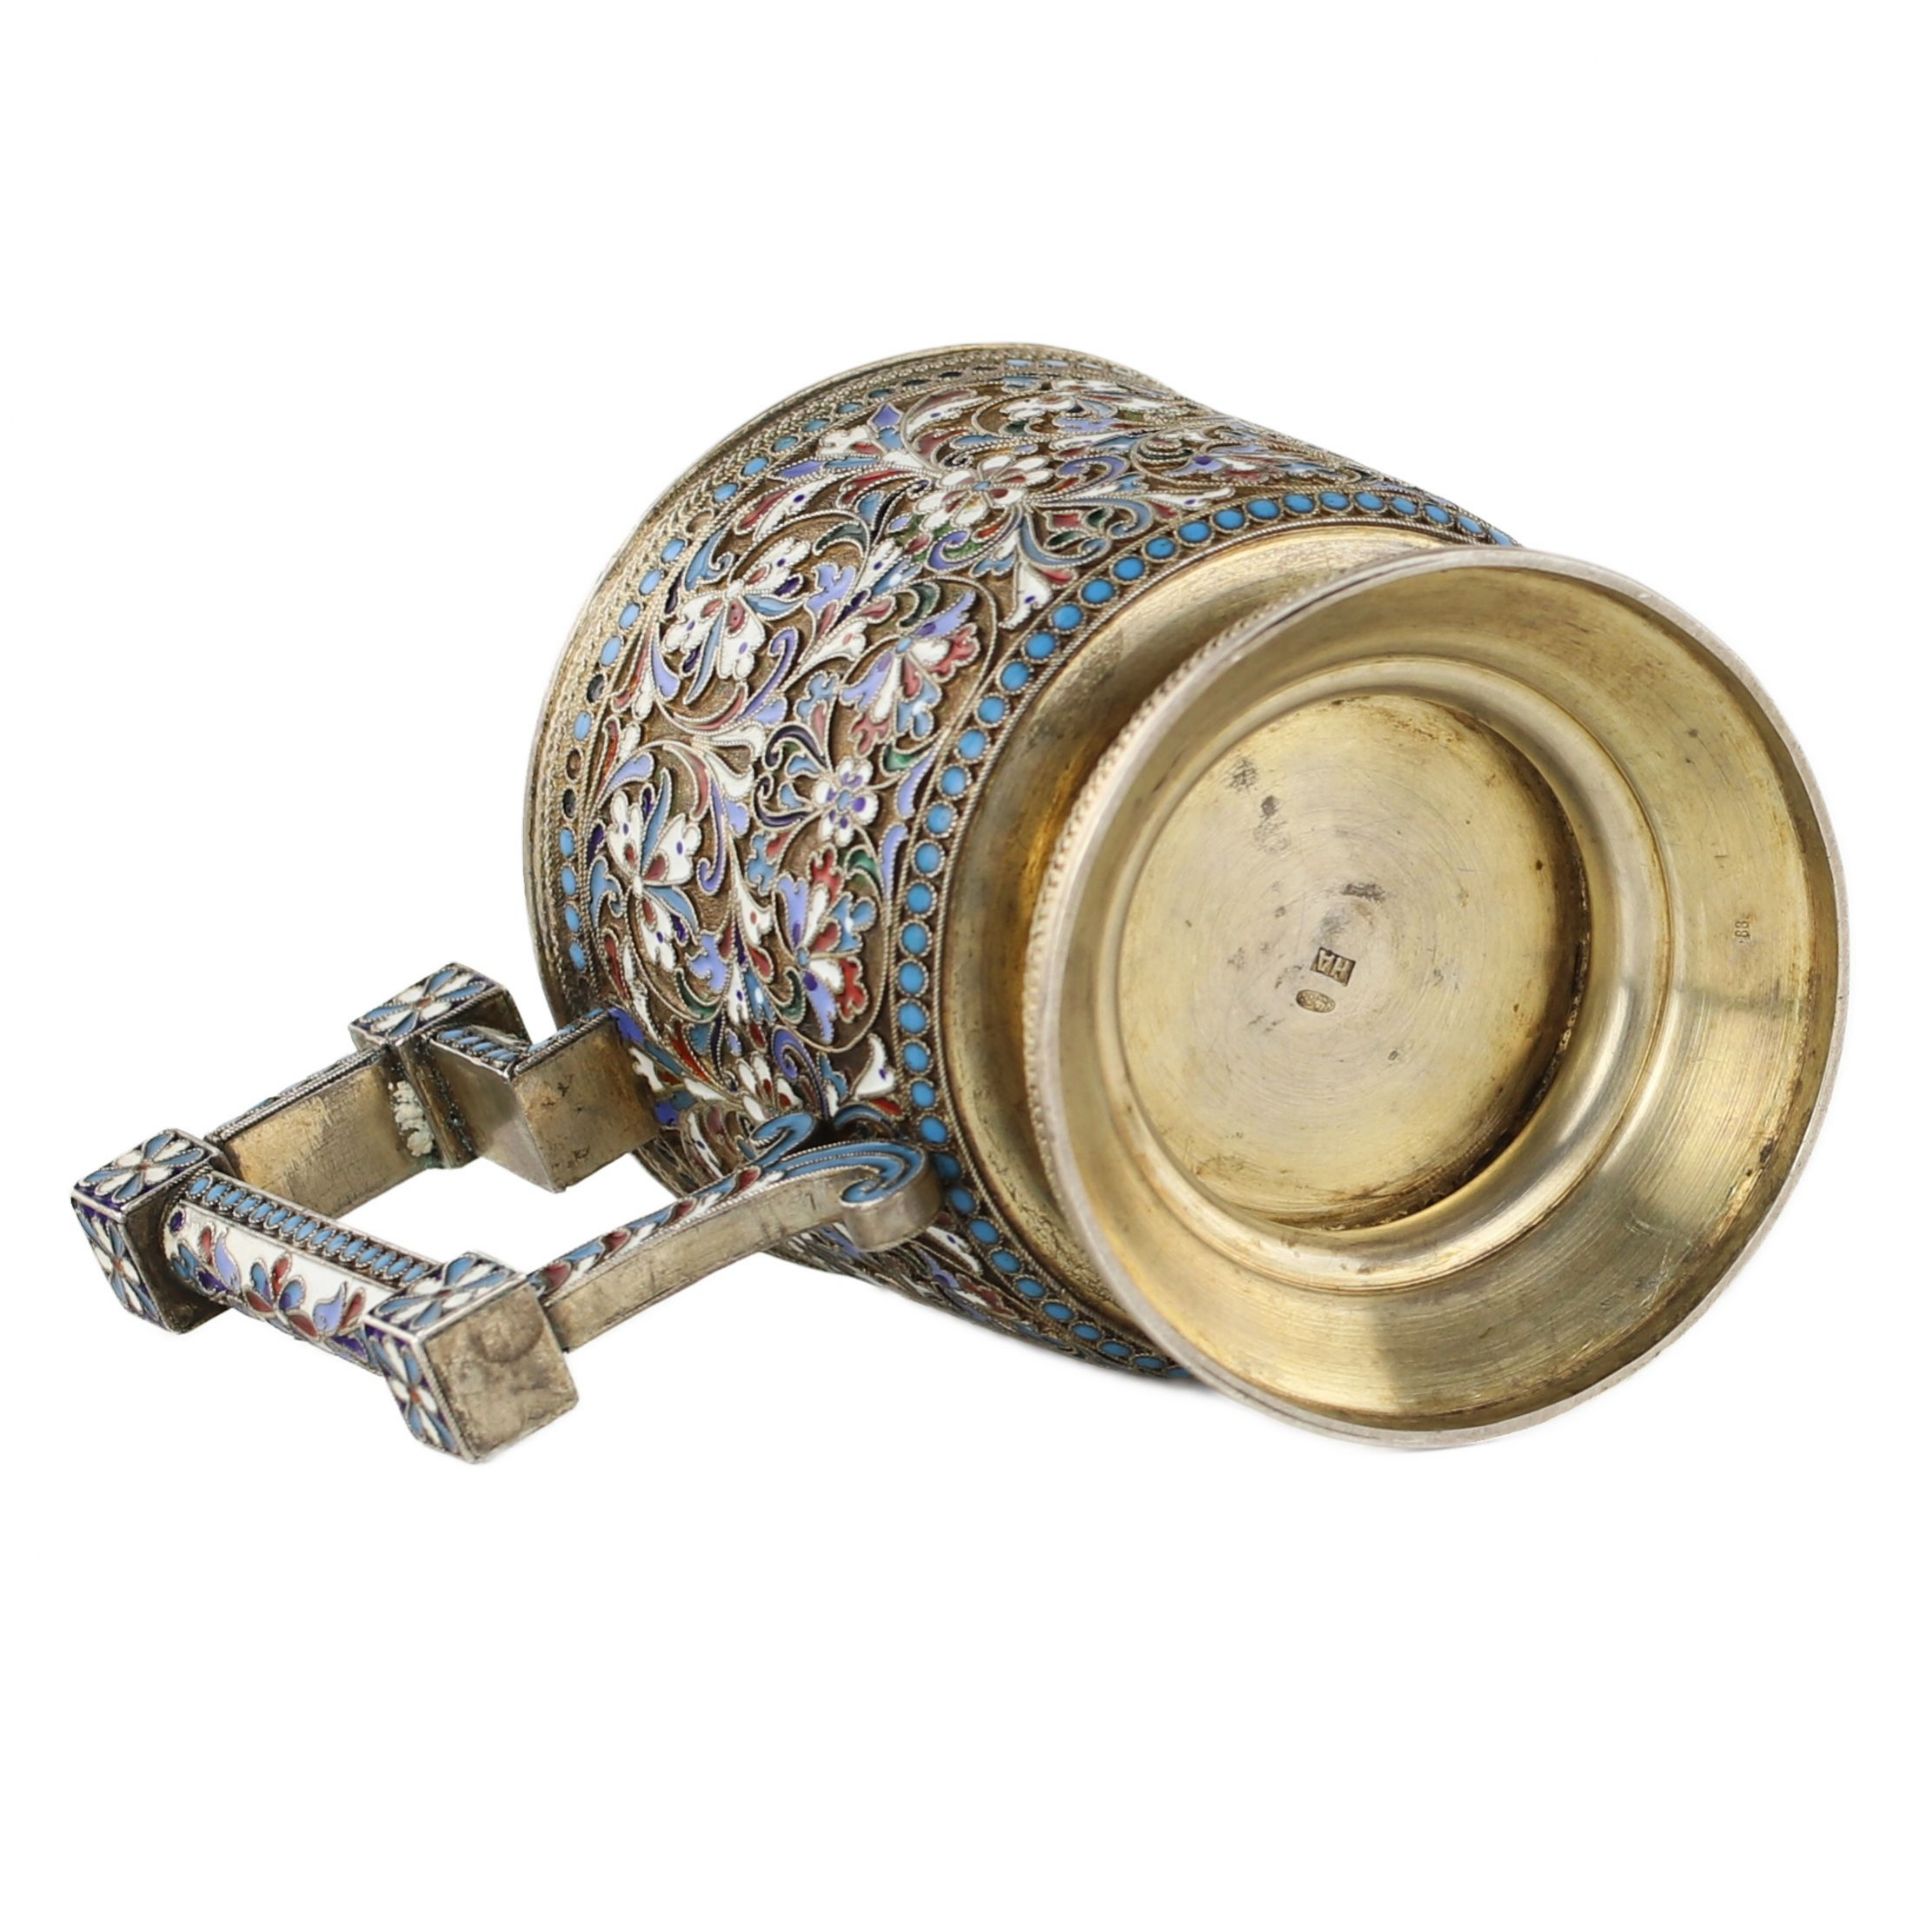 N.V. Alekseev. Silver glass holder in cloisonne enamels. Moscow. The turn of the 19th and 20th cent - Image 7 of 8